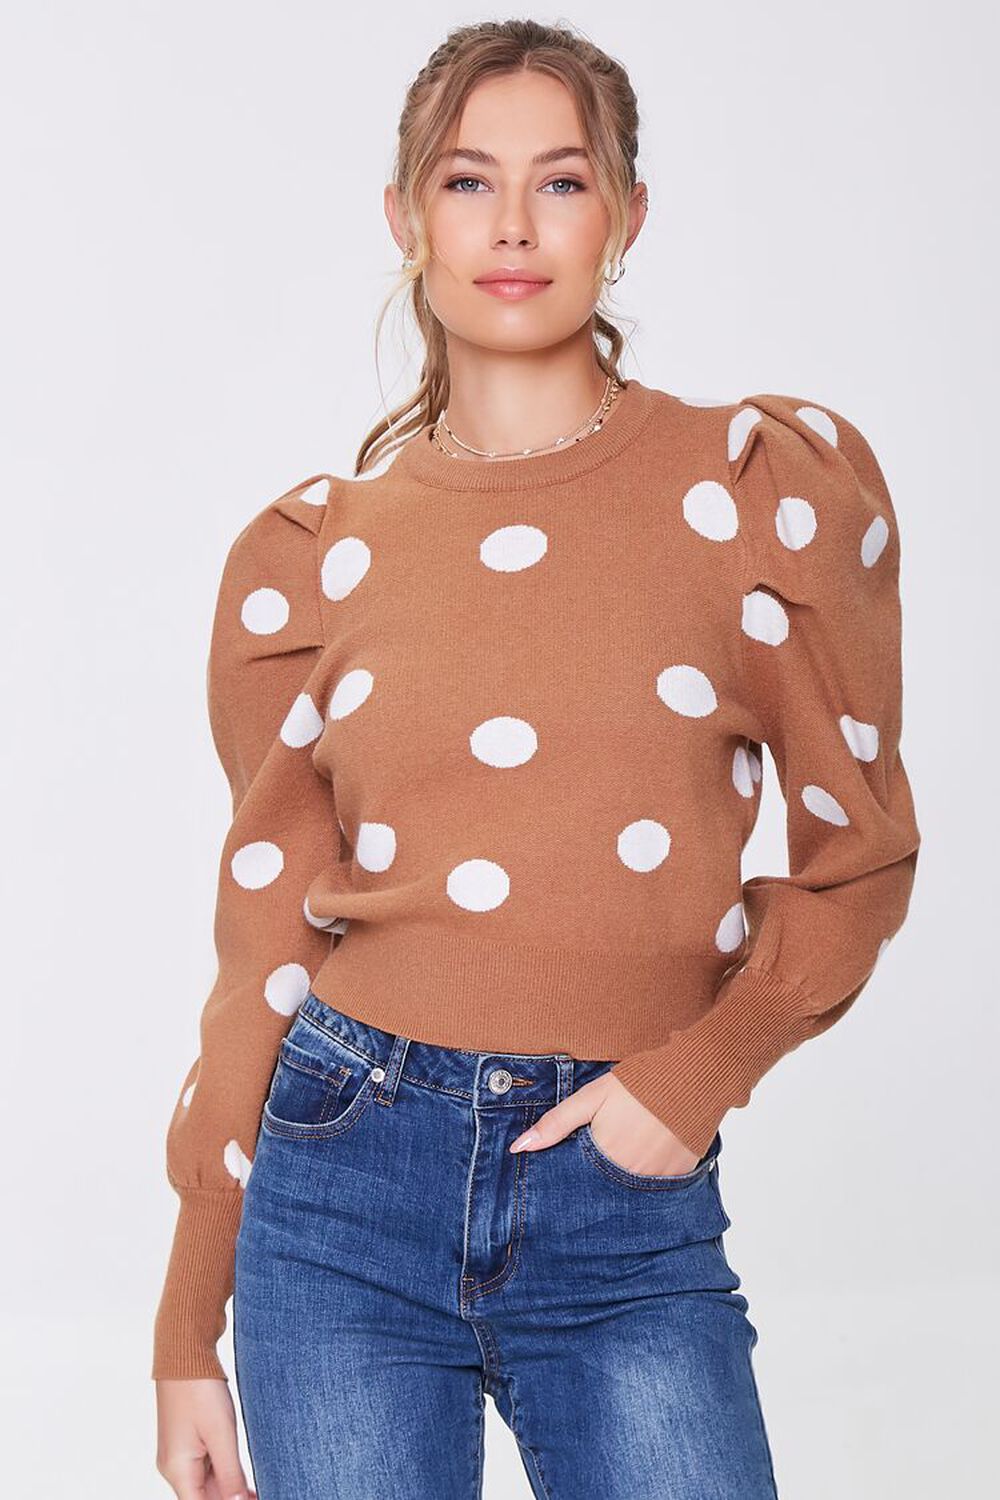 BROWN/IVORY Polka Dot Ruched Sweater, image 1